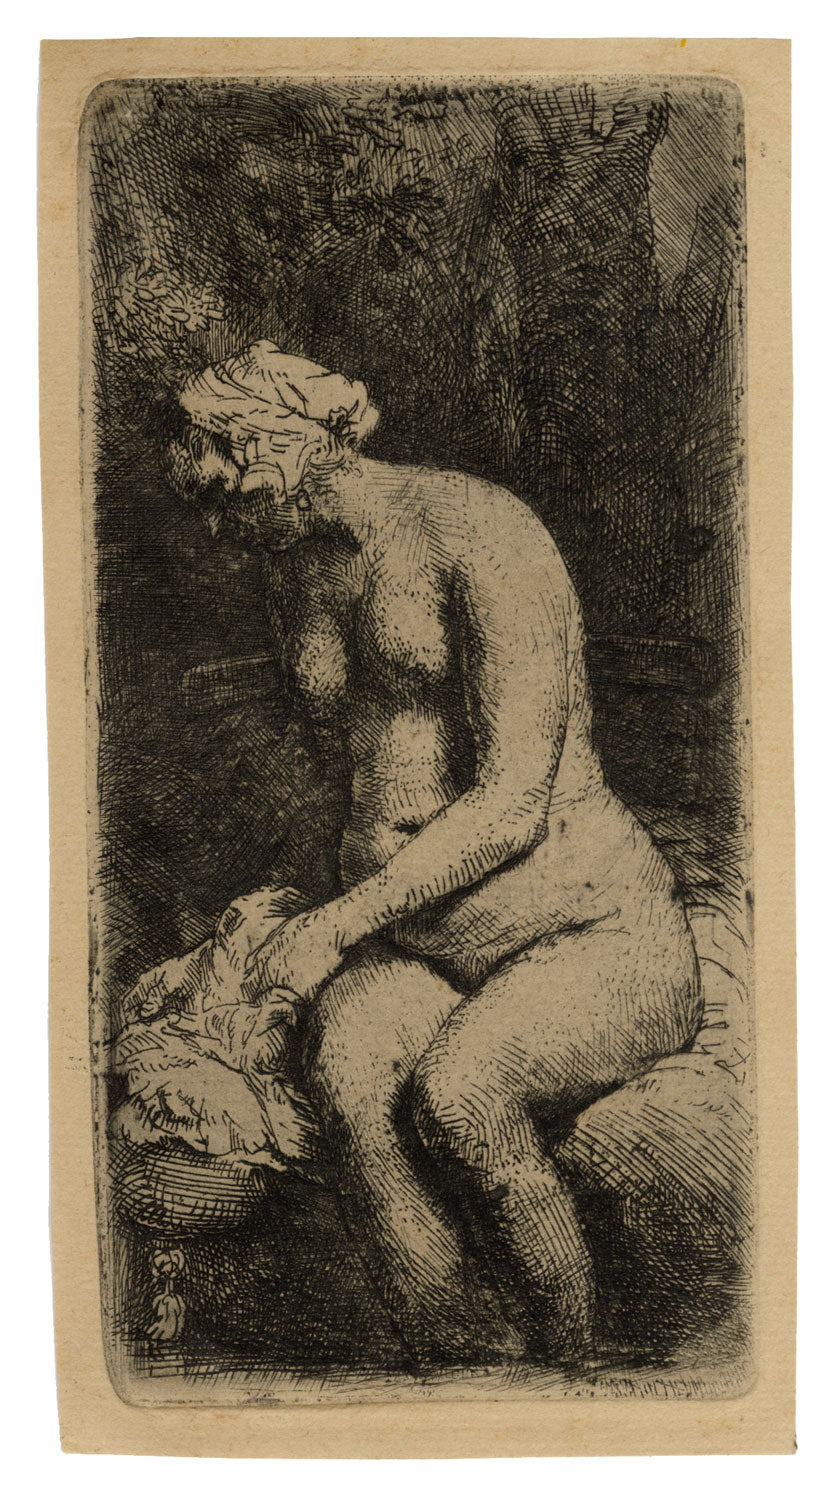 Woman Bathing her Feet at a Brook